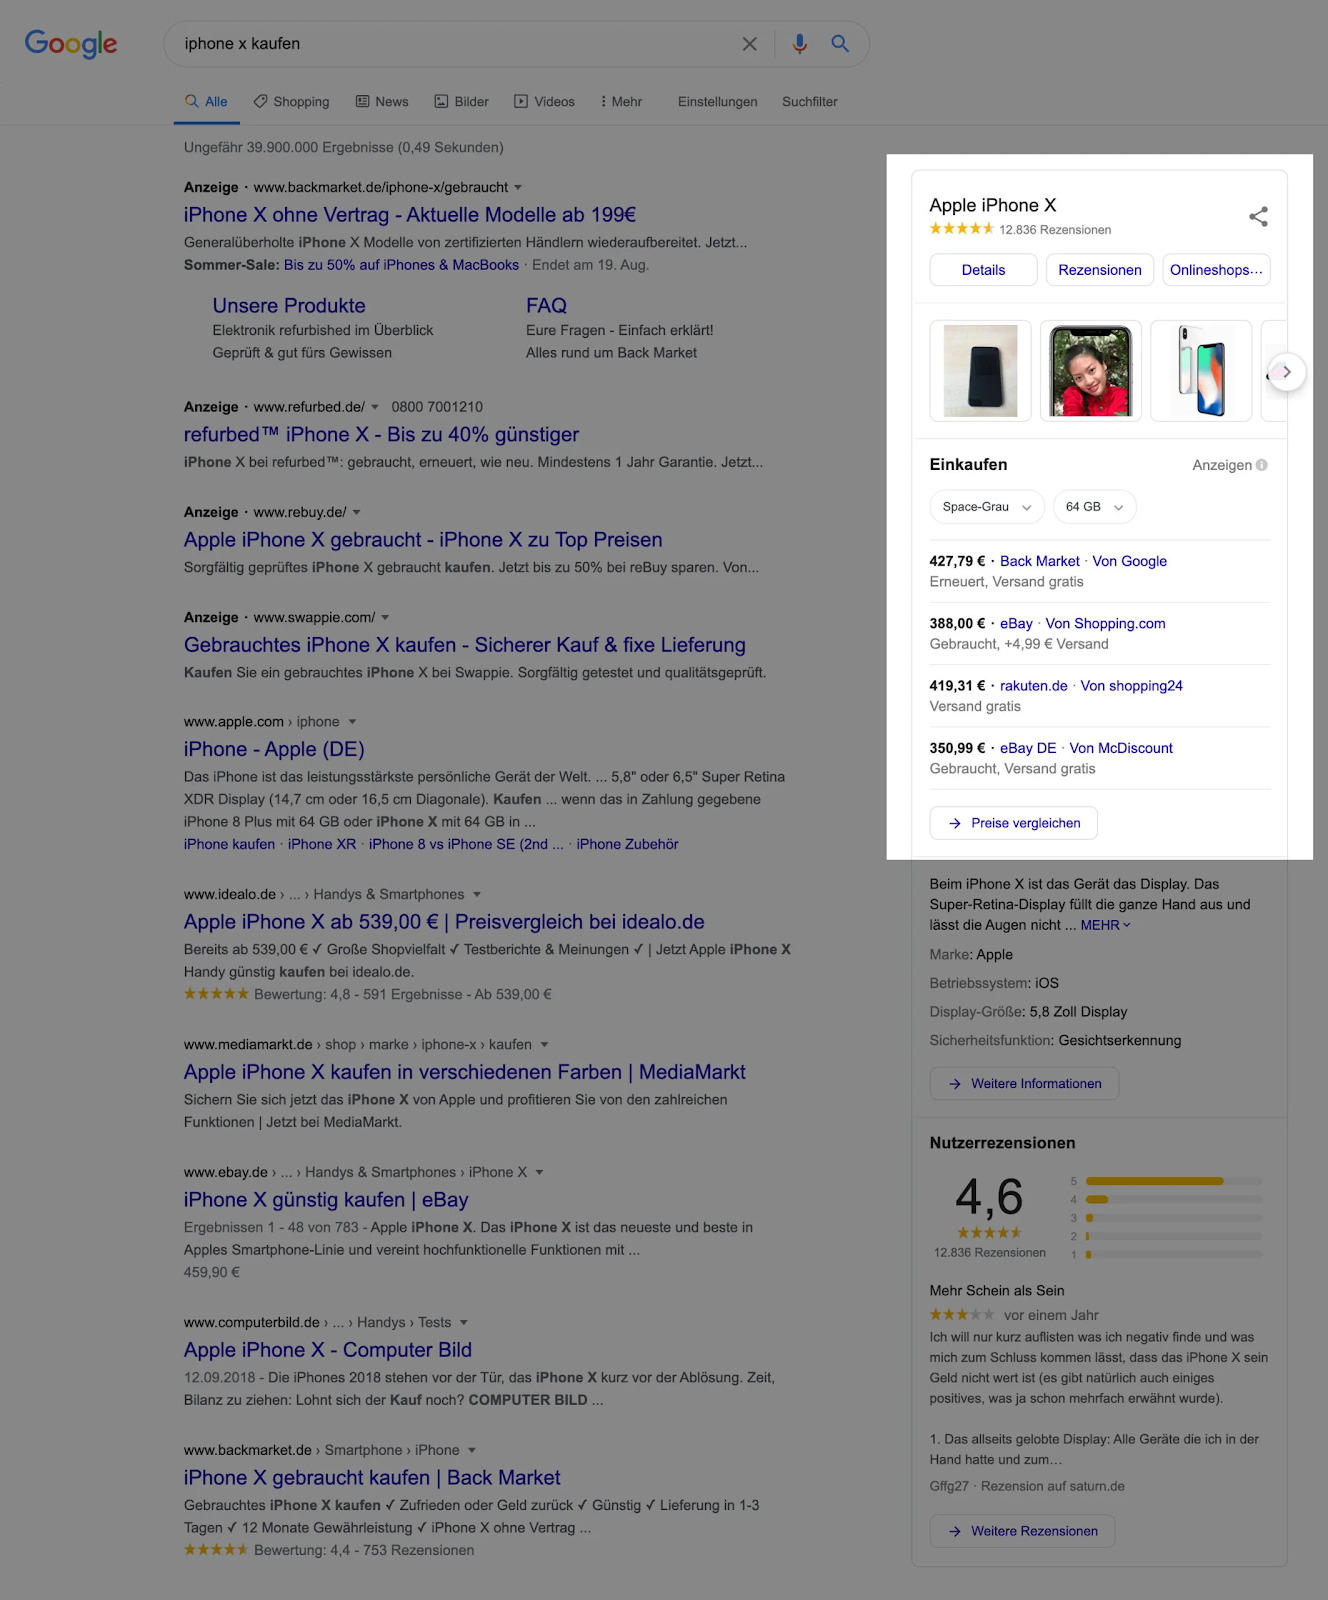 An example of a shopping-focused search result.